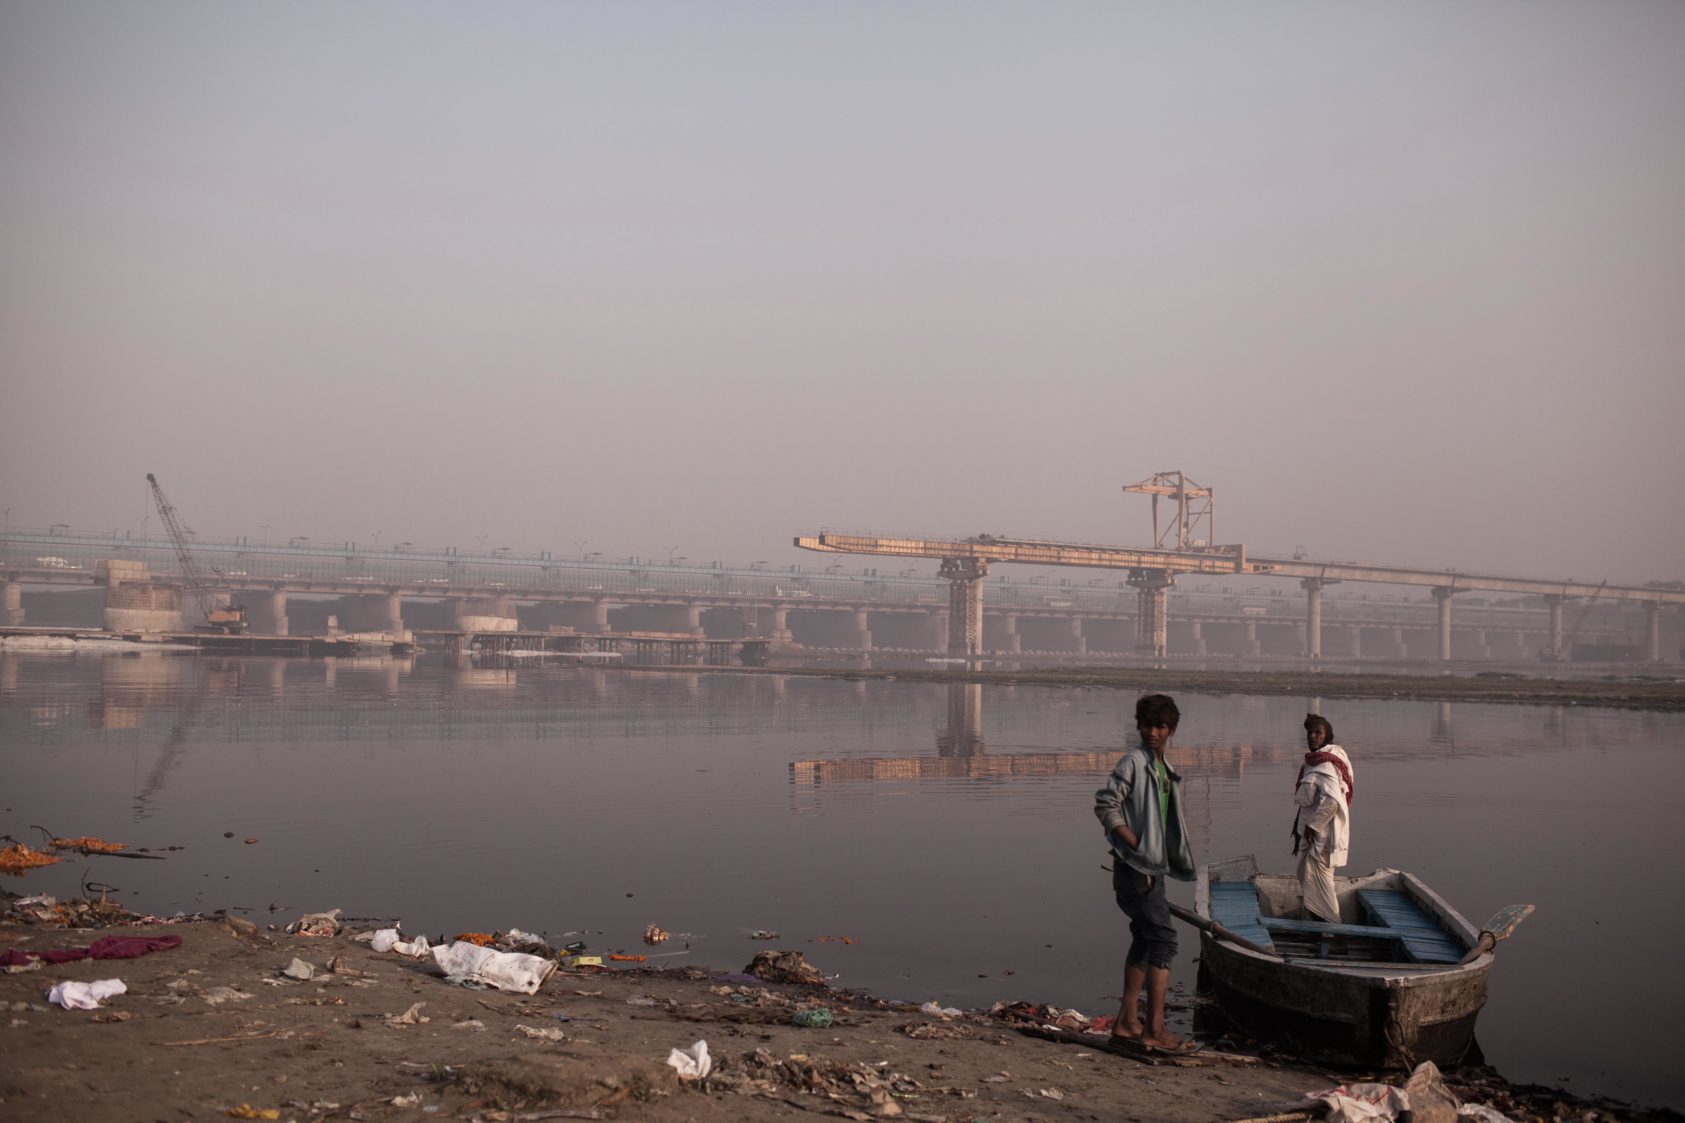 A father son duo who helped people to cross the Yamuna River